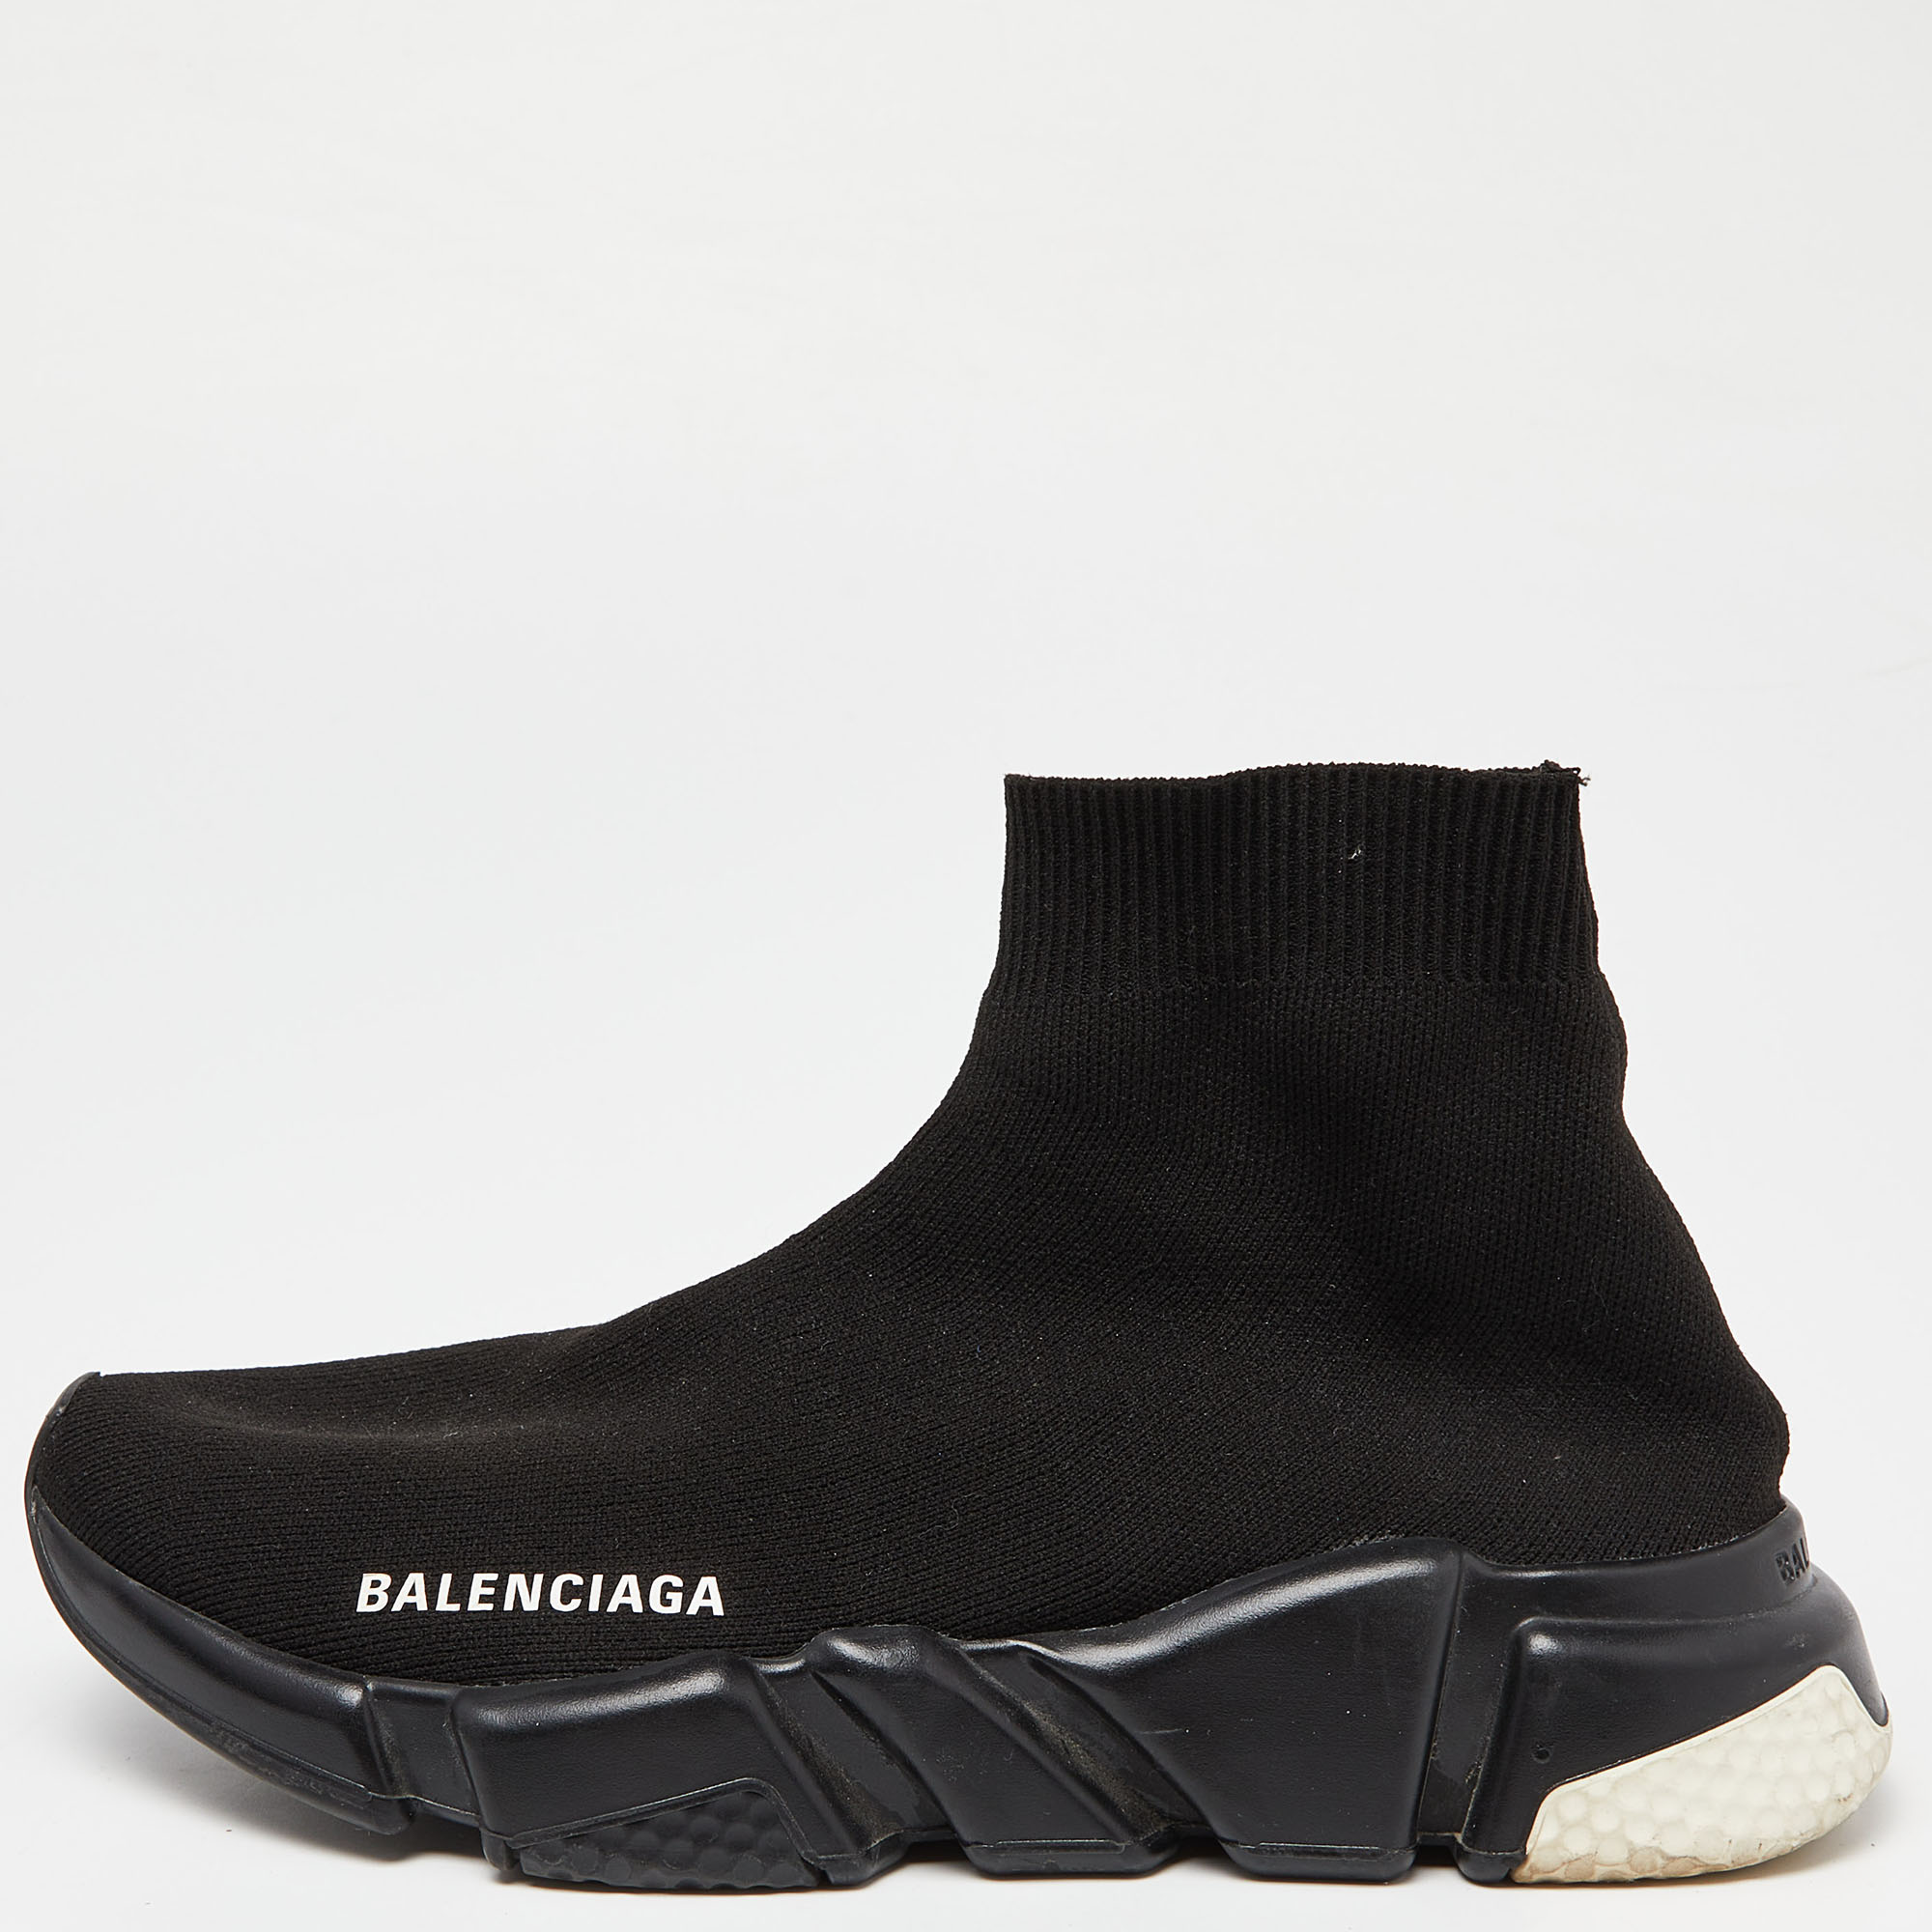 

Balenciaga Black Knit Fabric Speed Trainer High-Top Sneakers Size